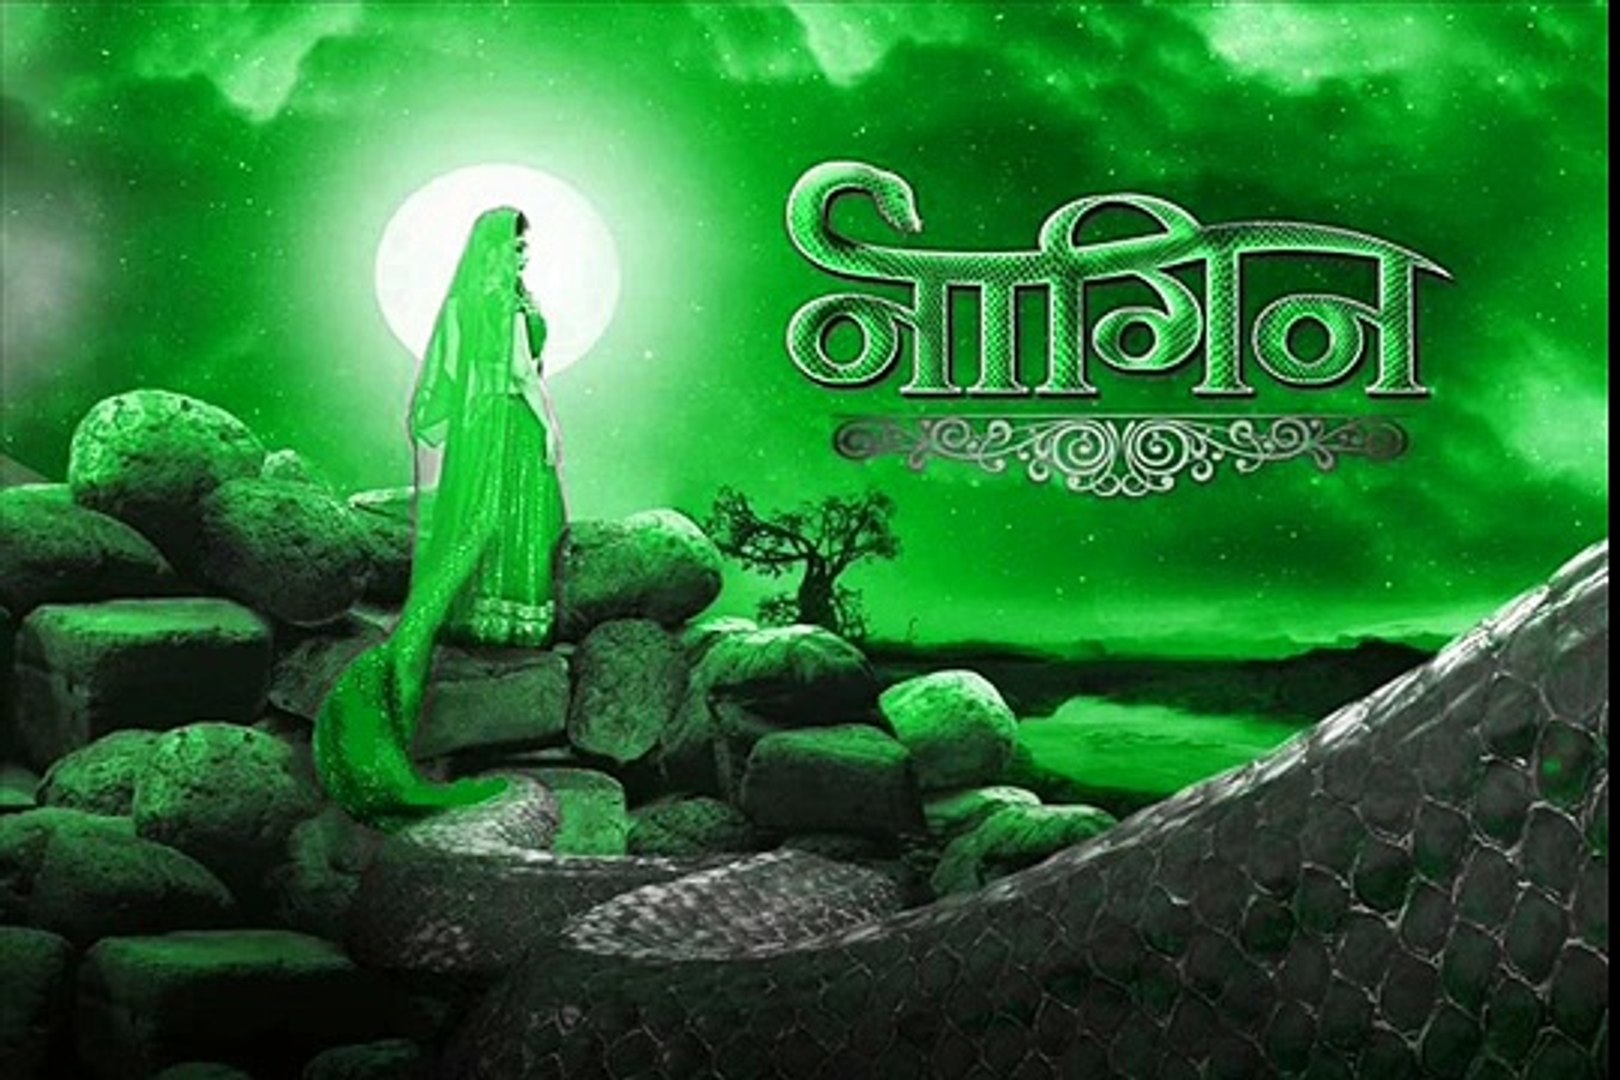 Naagin Colors Tv theme music title song  top songs best songs new songs upcoming songs latest songs 